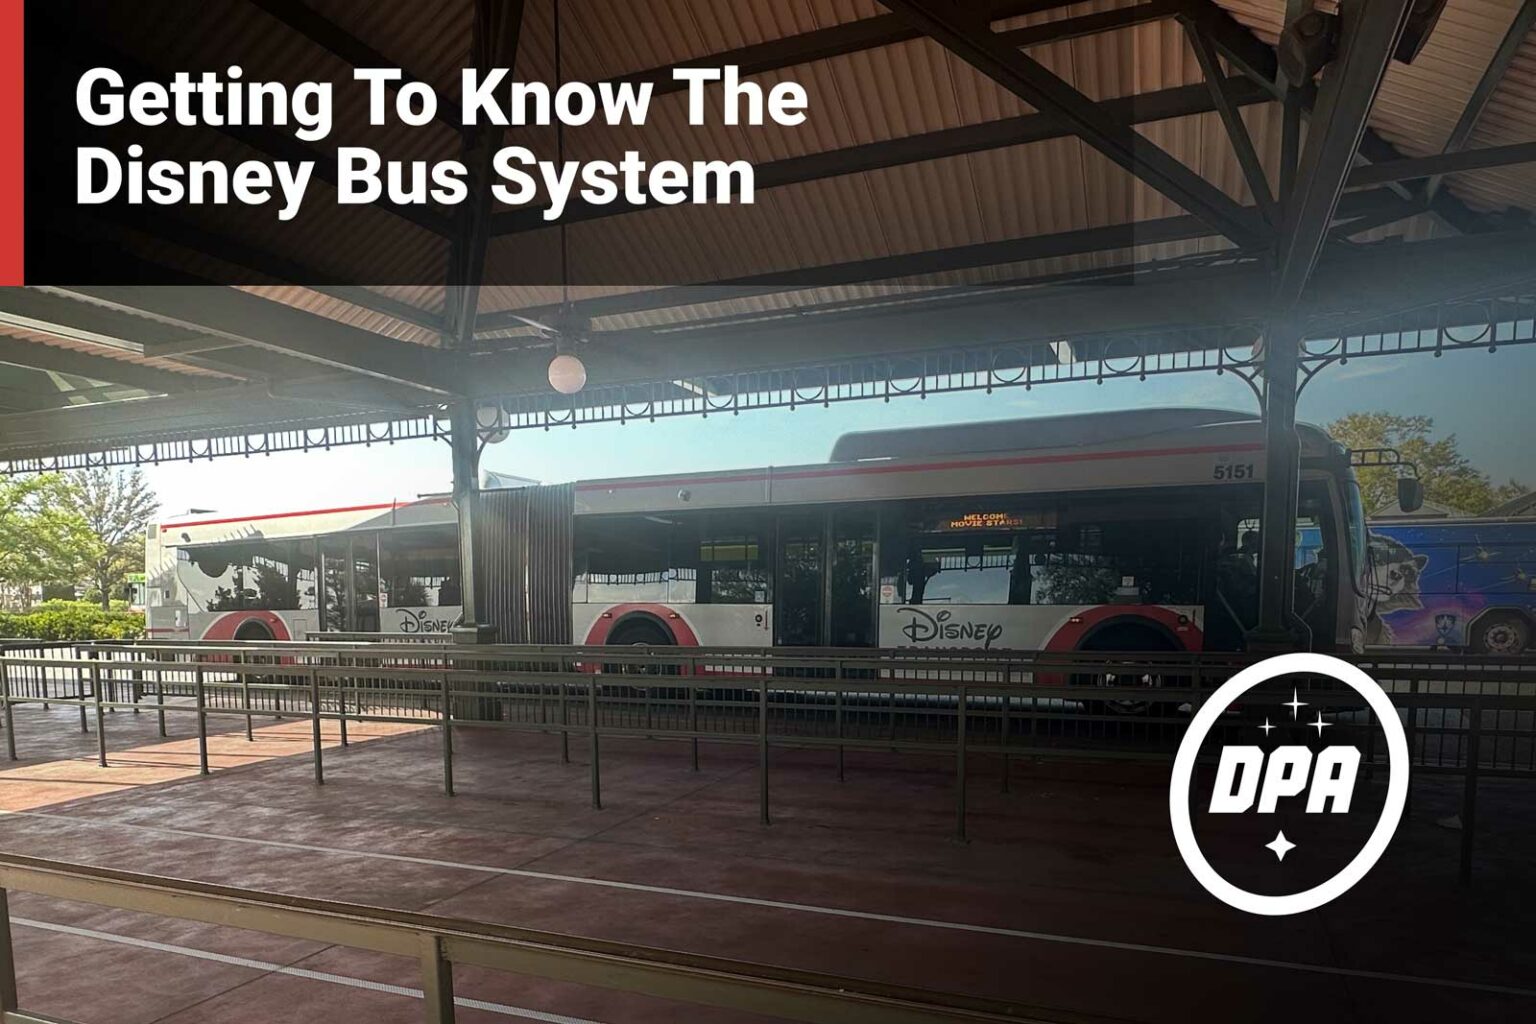 Getting To Know The
Disney Bus System